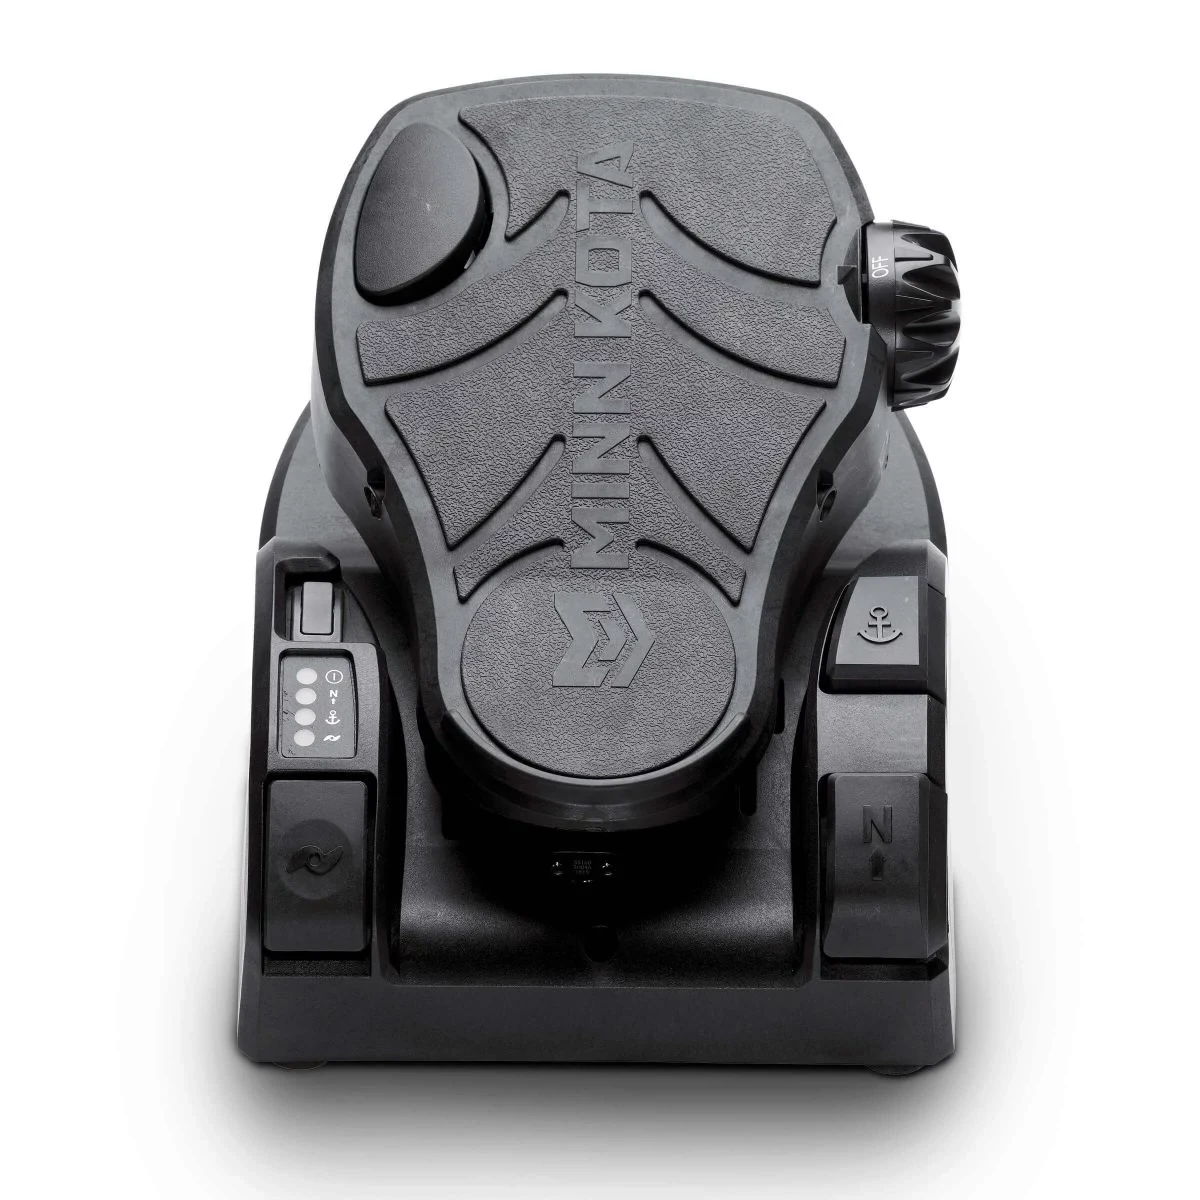 Ultrex foot pedal with Power Steering